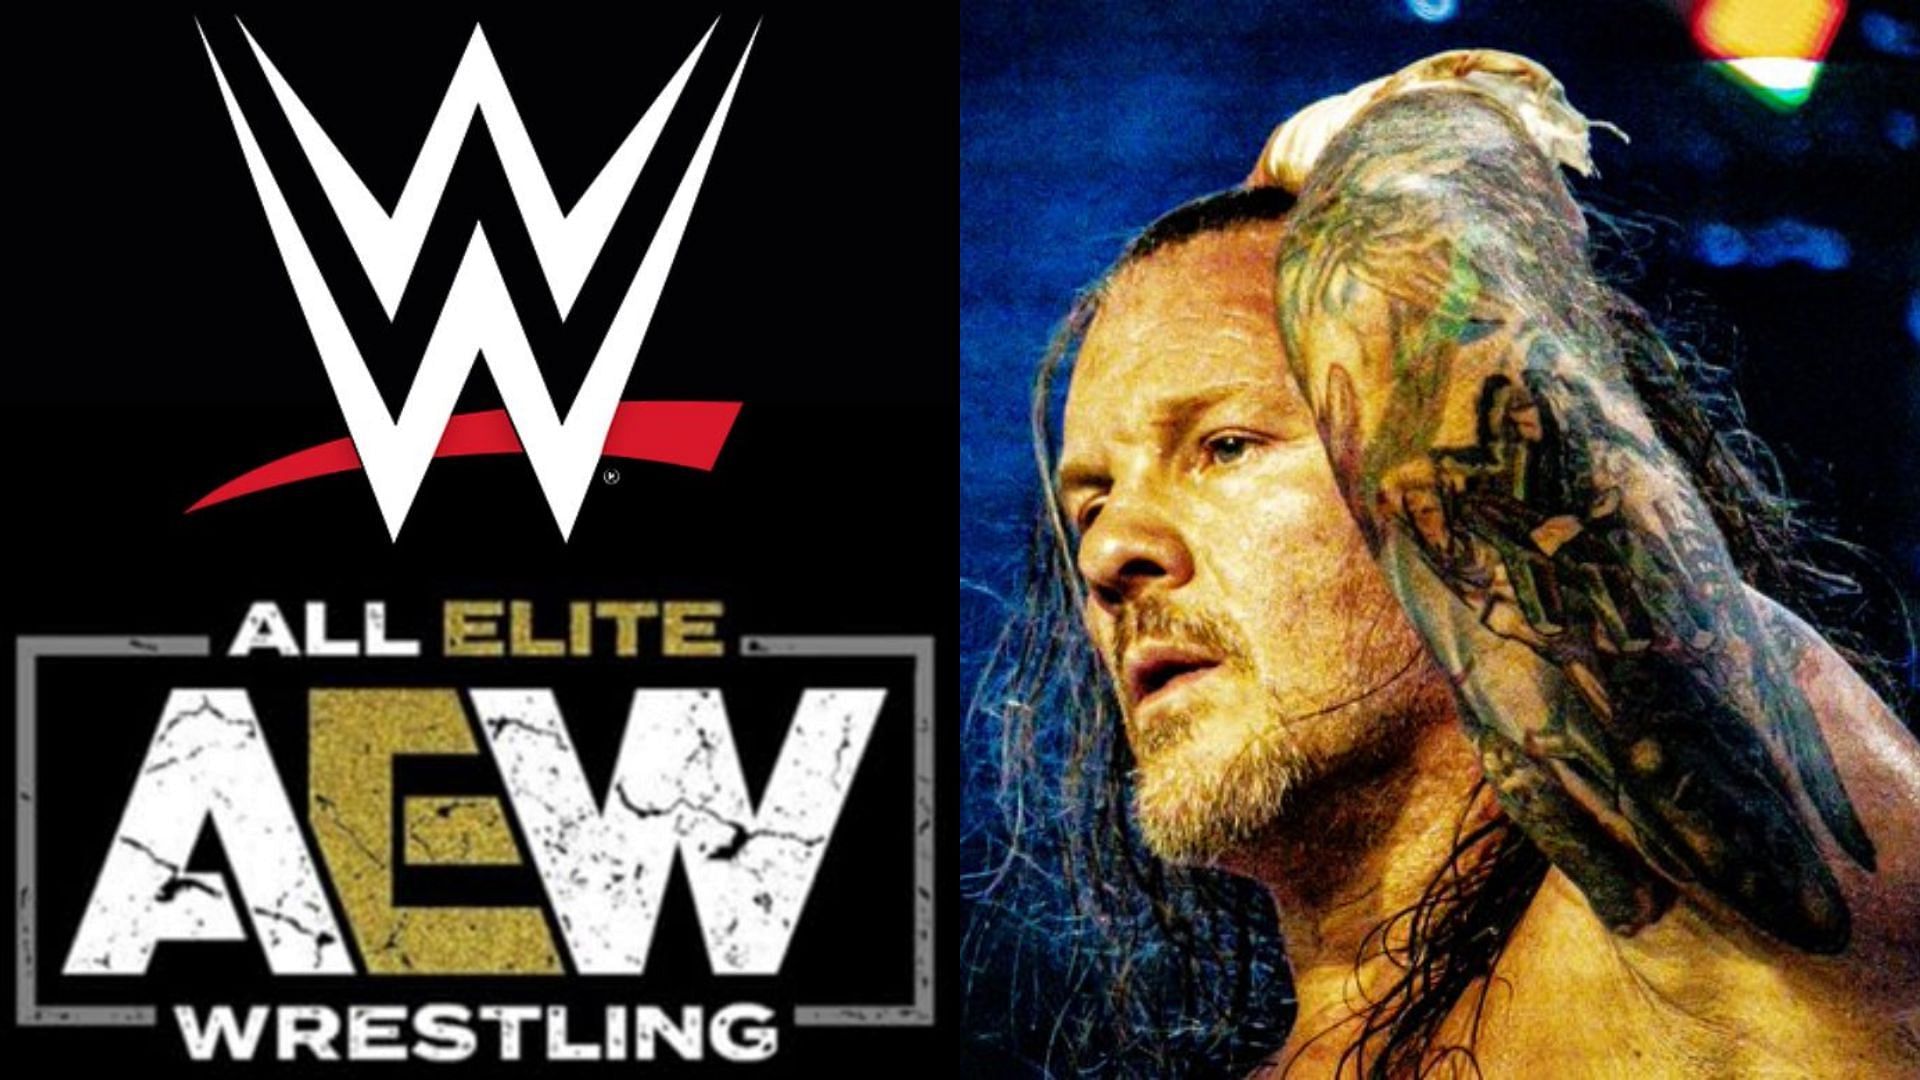 AEW and WWE logo (left), Chris Jericho (Right)